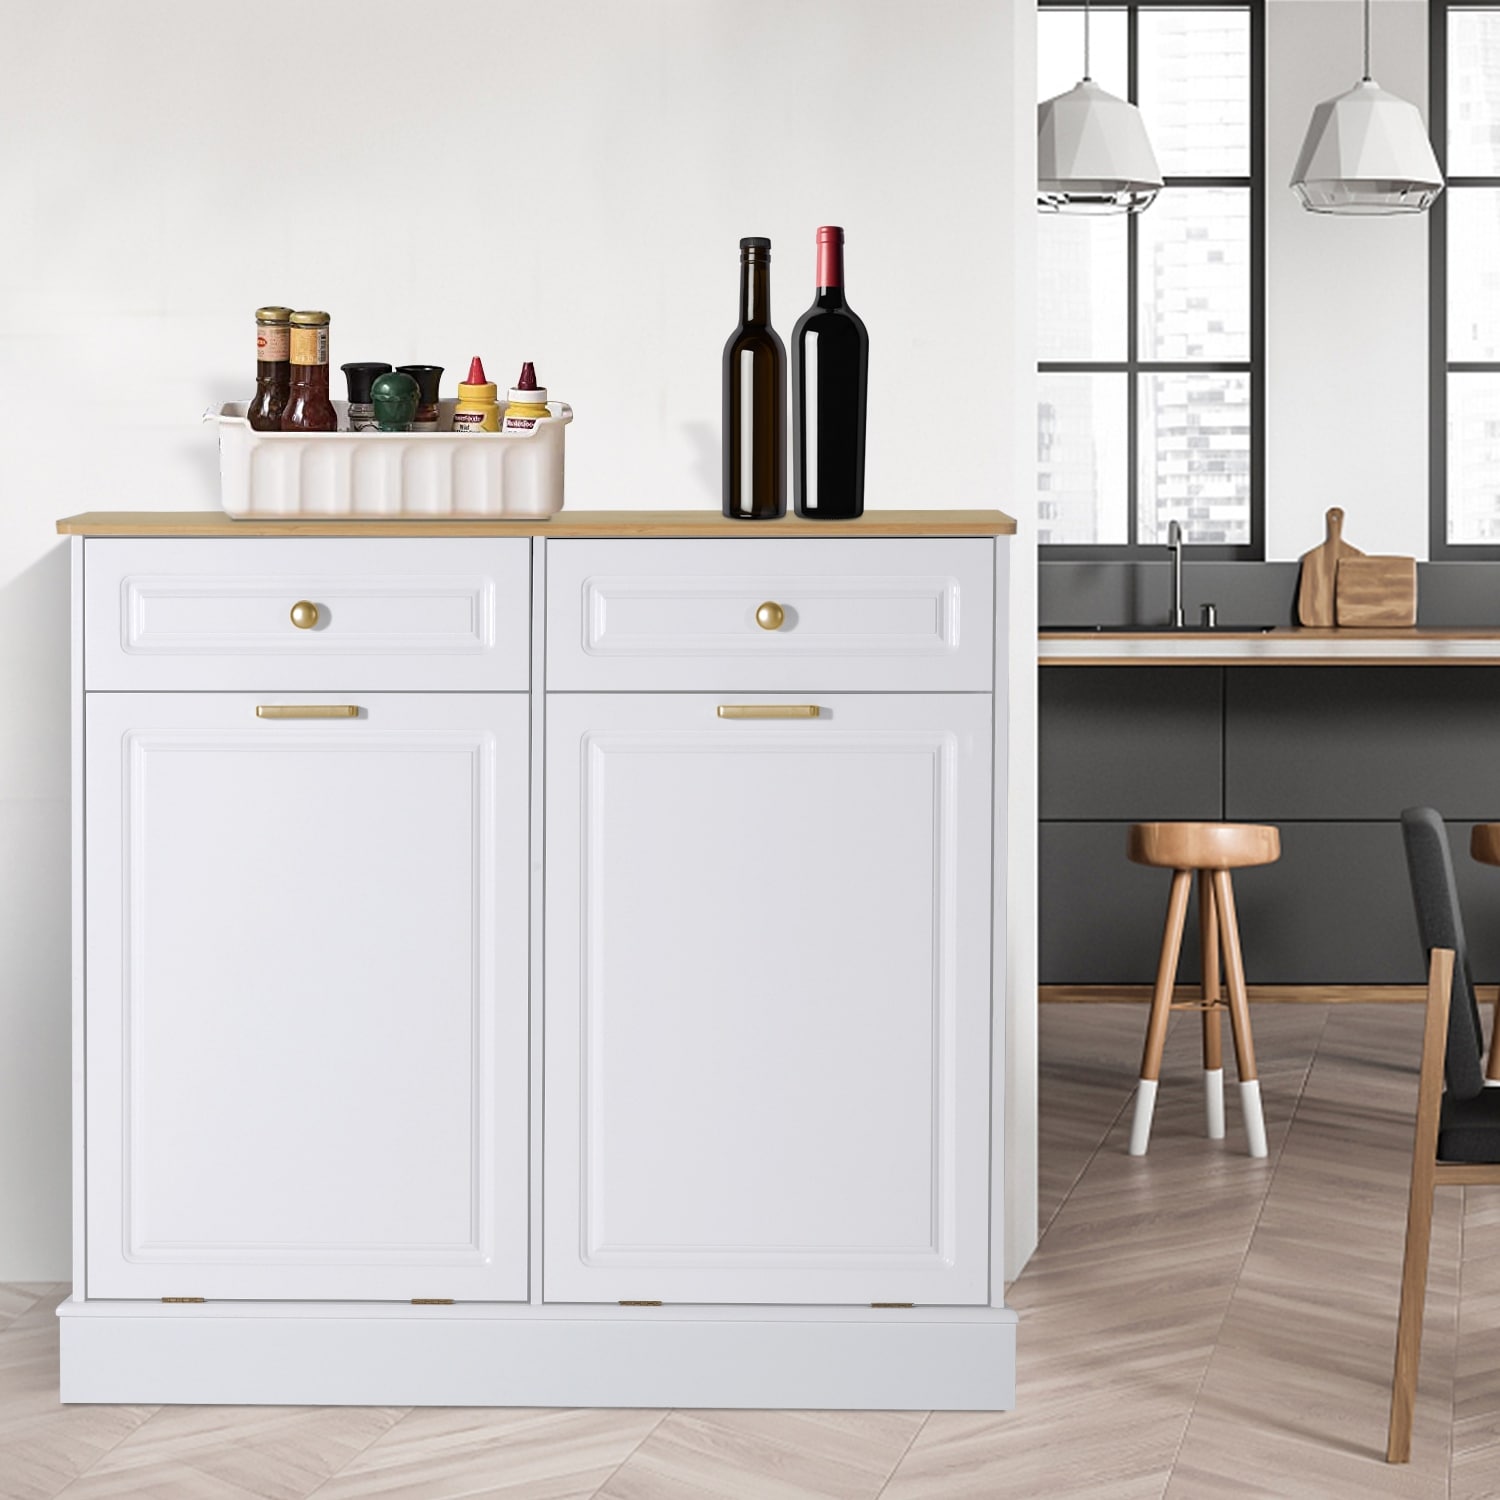 https://ak1.ostkcdn.com/images/products/is/images/direct/5c98a058bb16825ffb6af12a5a9fd5dbc3e550e1/Kitchen-Trash-Cabinet.jpg